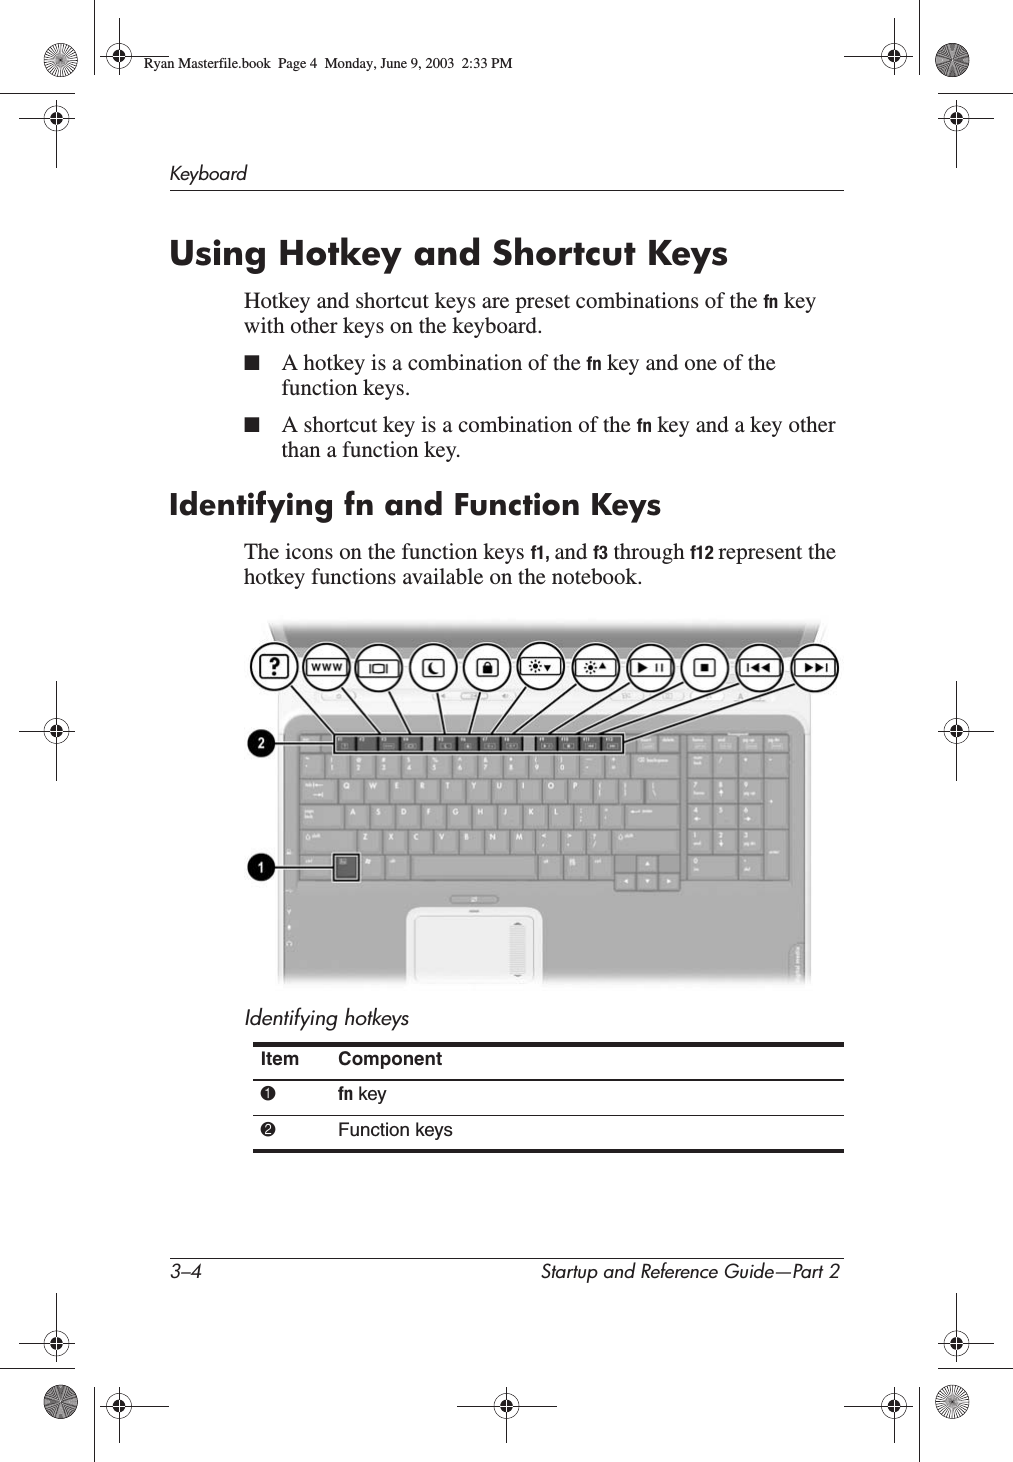 3–4 Startup and Reference Guide—Part 2KeyboardUsing Hotkey and Shortcut KeysHotkey and shortcut keys are preset combinations of the fn key with other keys on the keyboard.■A hotkey is a combination of the fn key and one of the function keys. ■A shortcut key is a combination of the fn key and a key other than a function key.Identifying fn and Function KeysThe icons on the function keys f1, and f3 through f12 represent the hotkey functions available on the notebook.Identifying hotkeysItem Component1fn key2Function keysRyan Masterfile.book  Page 4  Monday, June 9, 2003  2:33 PM